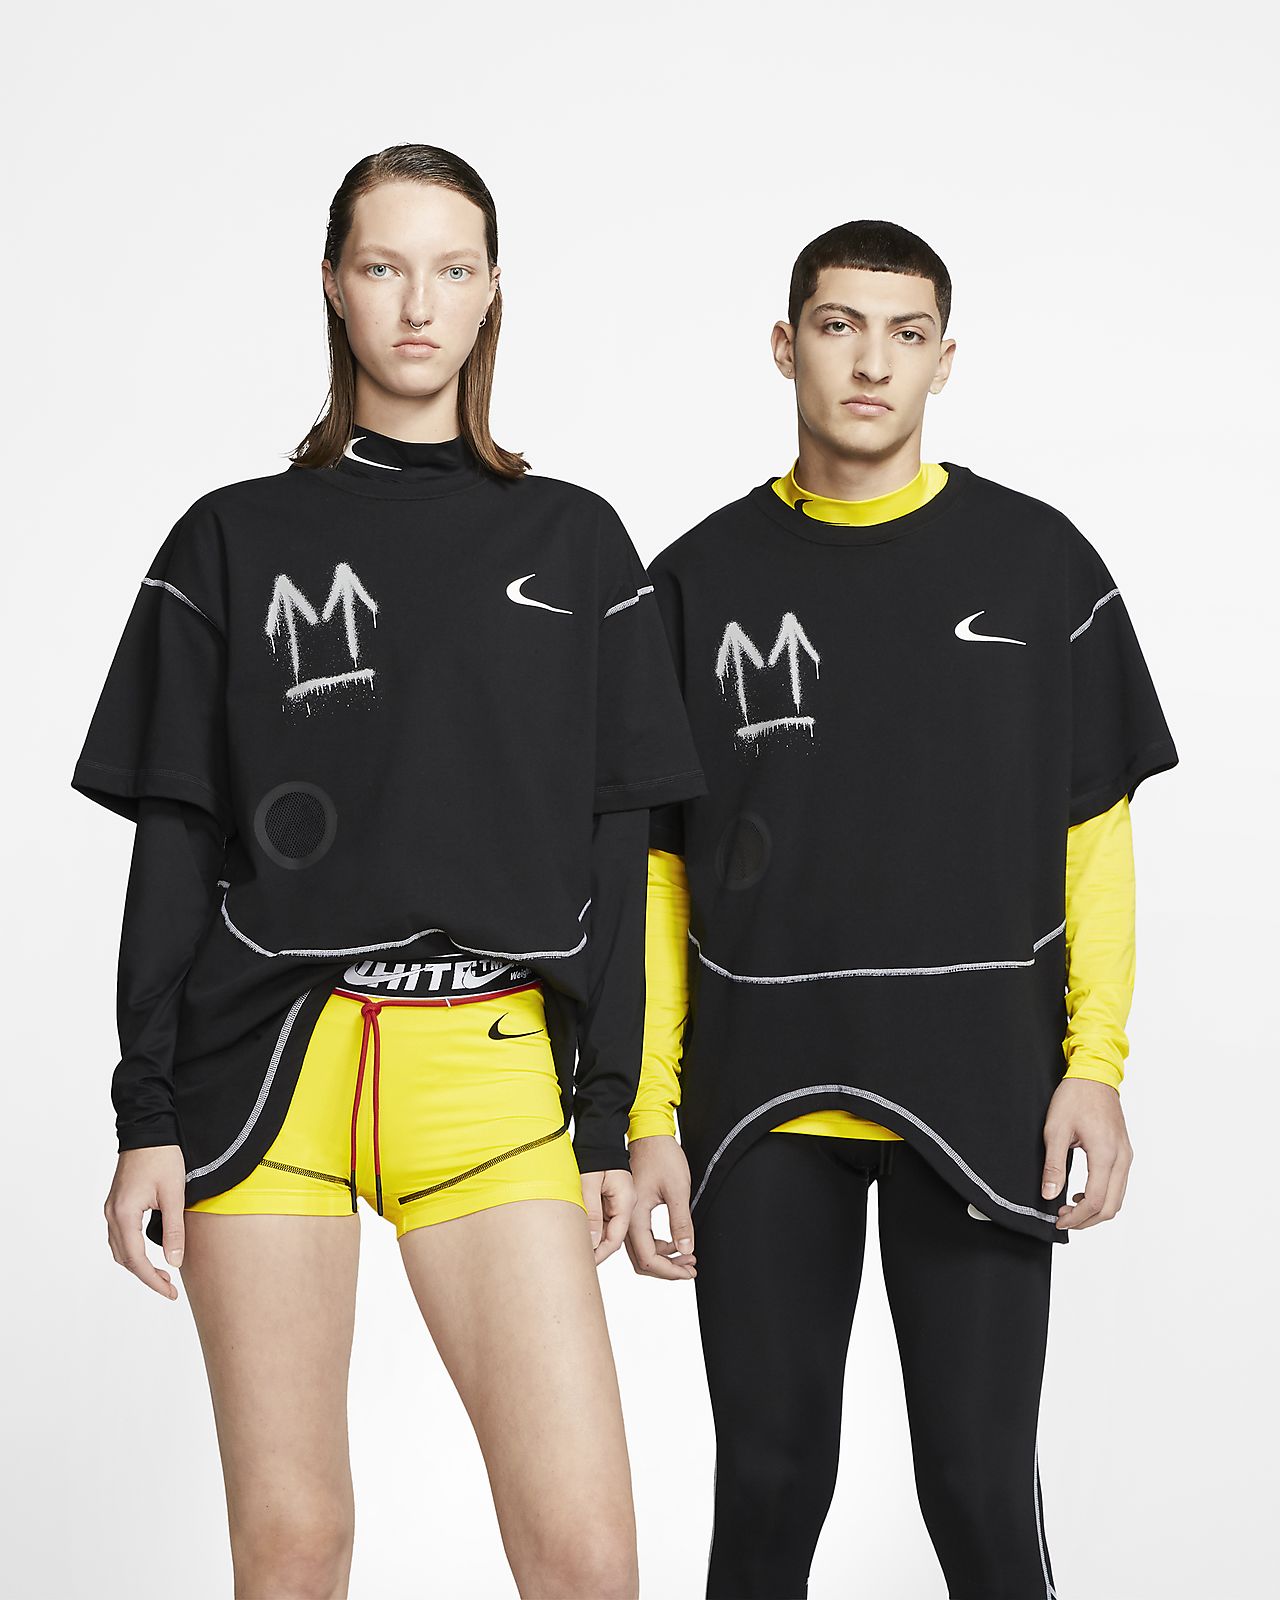 nike id clothes